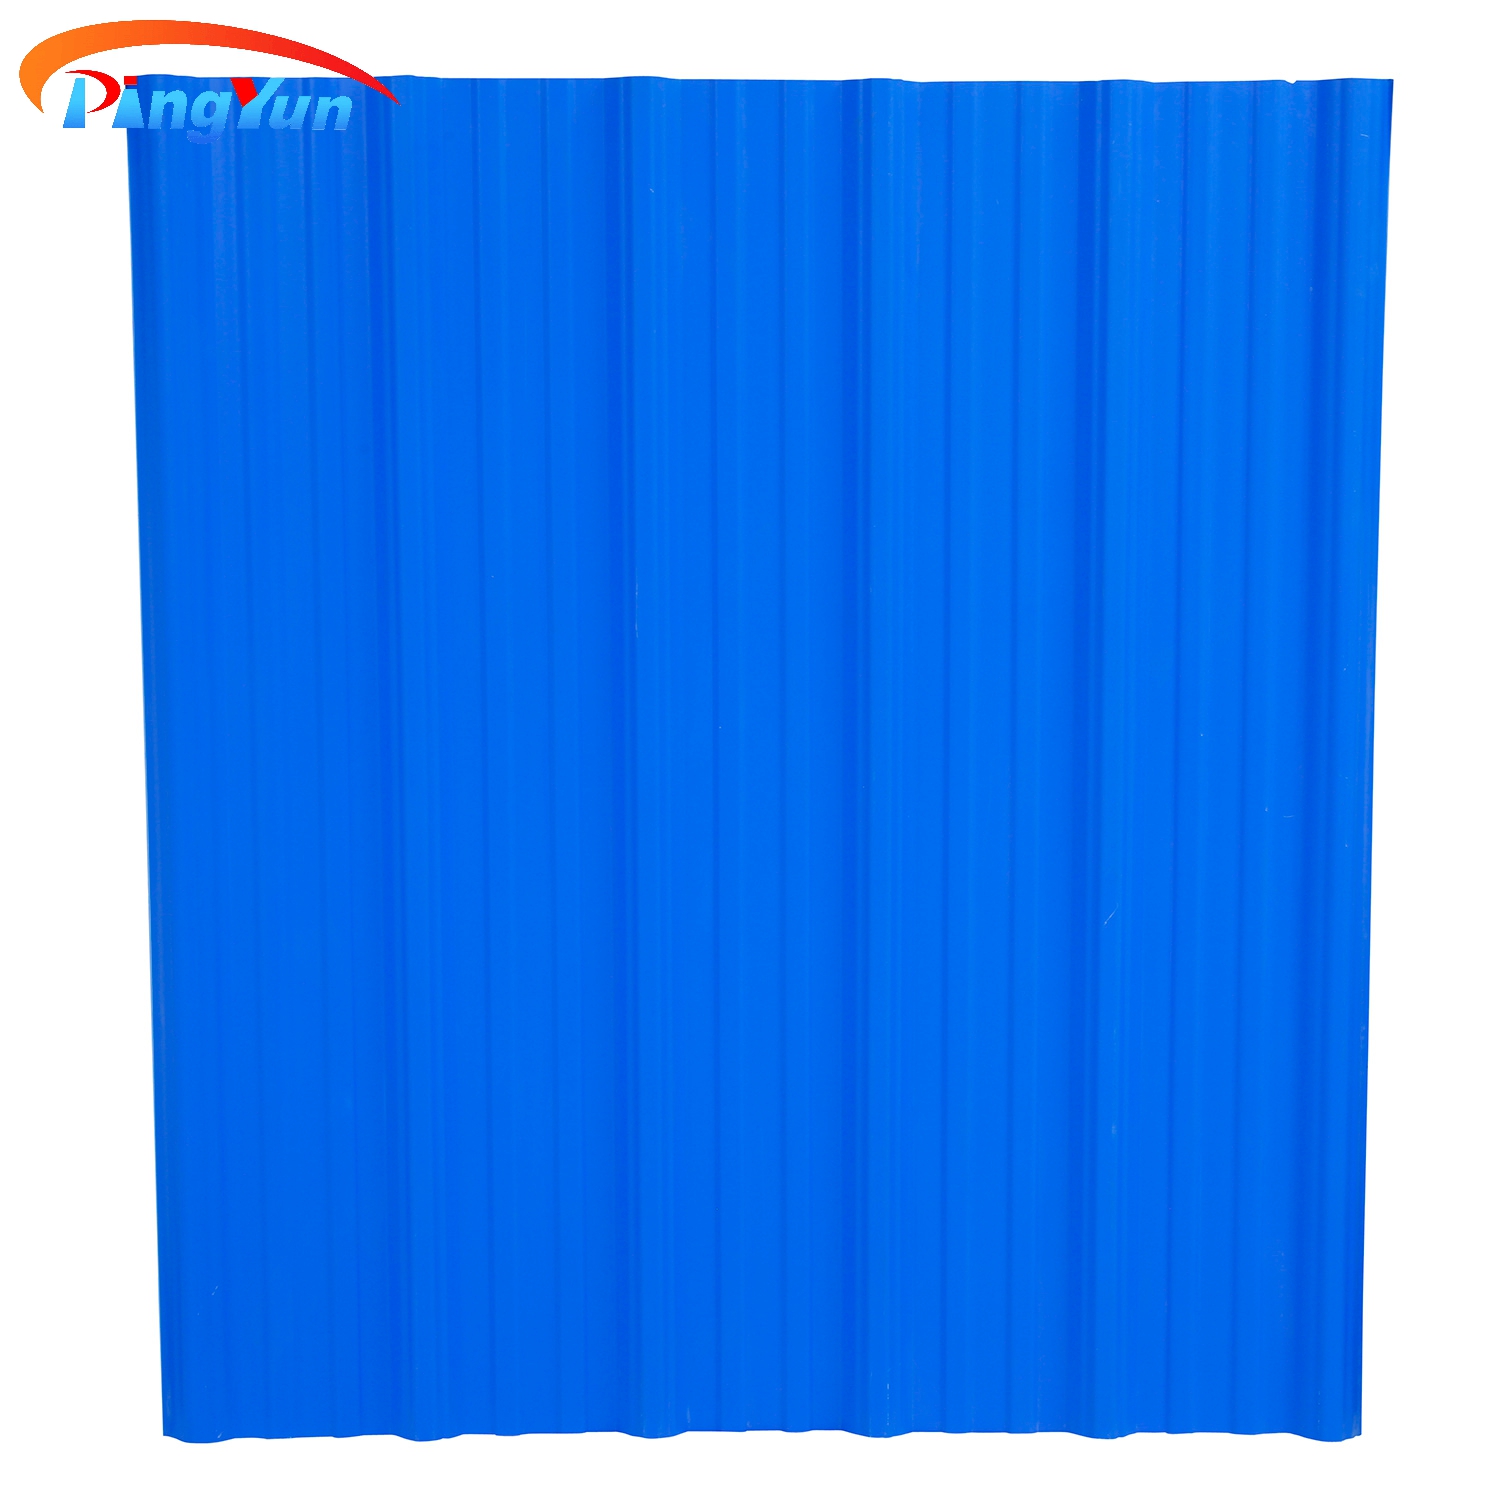 Color stable pvc roof tiles plastic tile for roof Ecuador popular upvc plastic roof sheet for warehouse